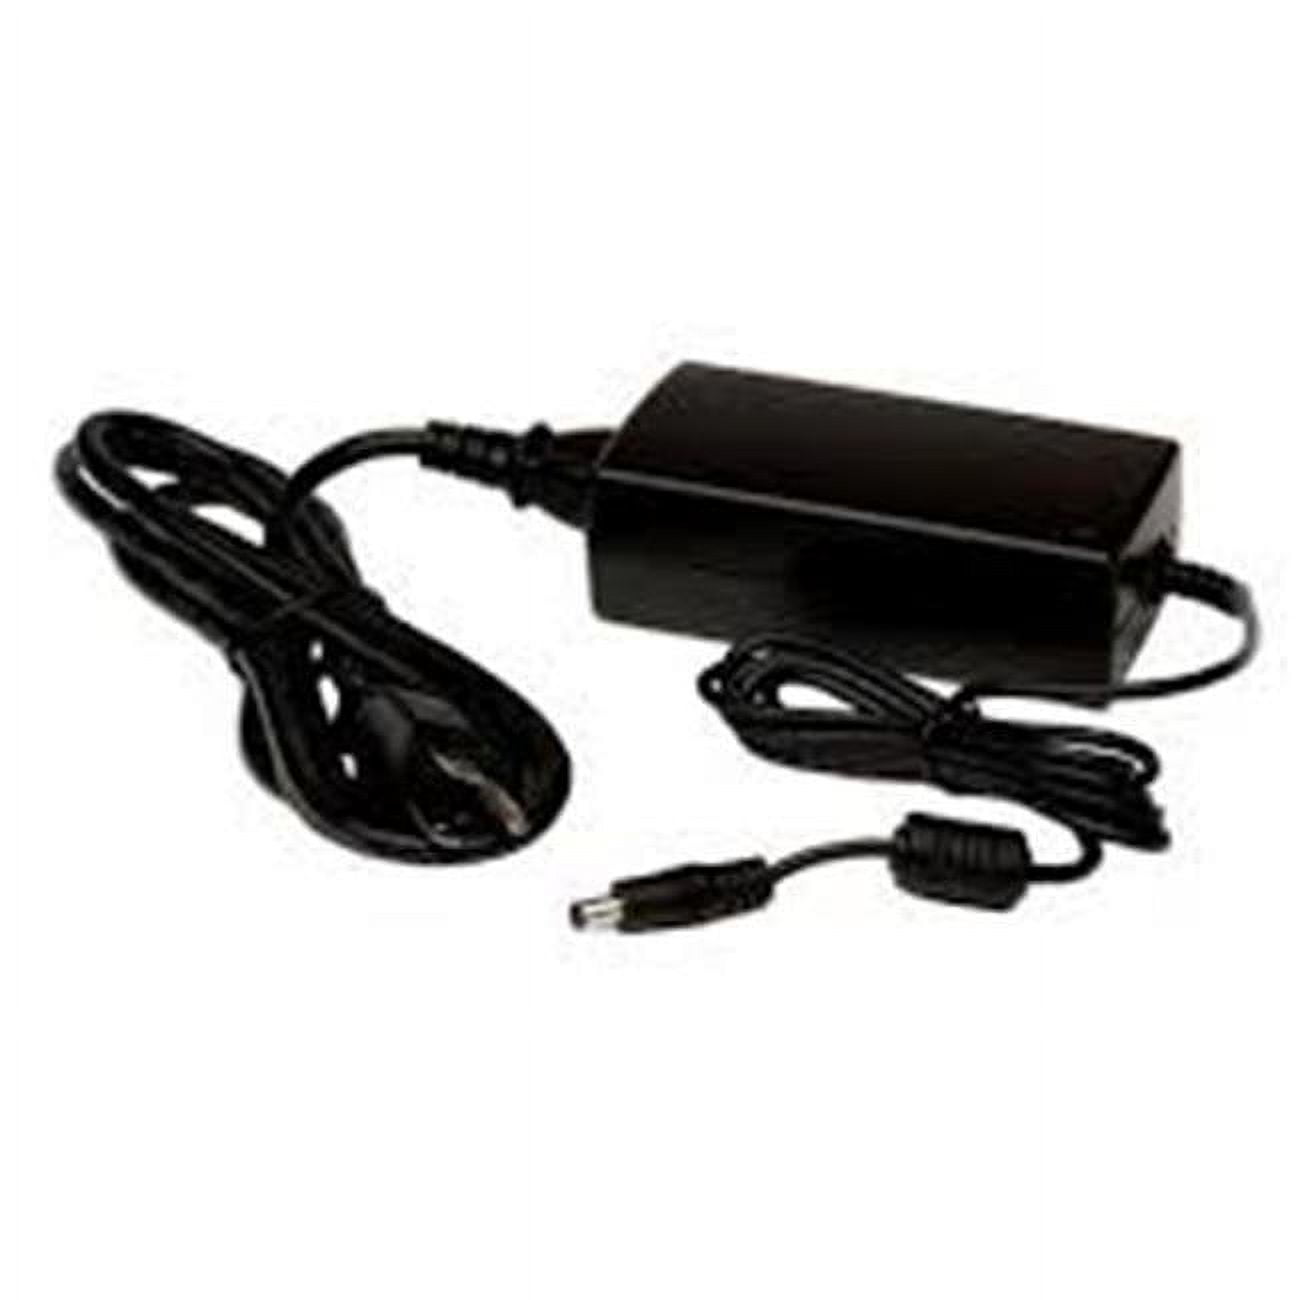 Picture of American Lighting PS-90-24VPI 24V DC & 90W Plug-In Power Supply